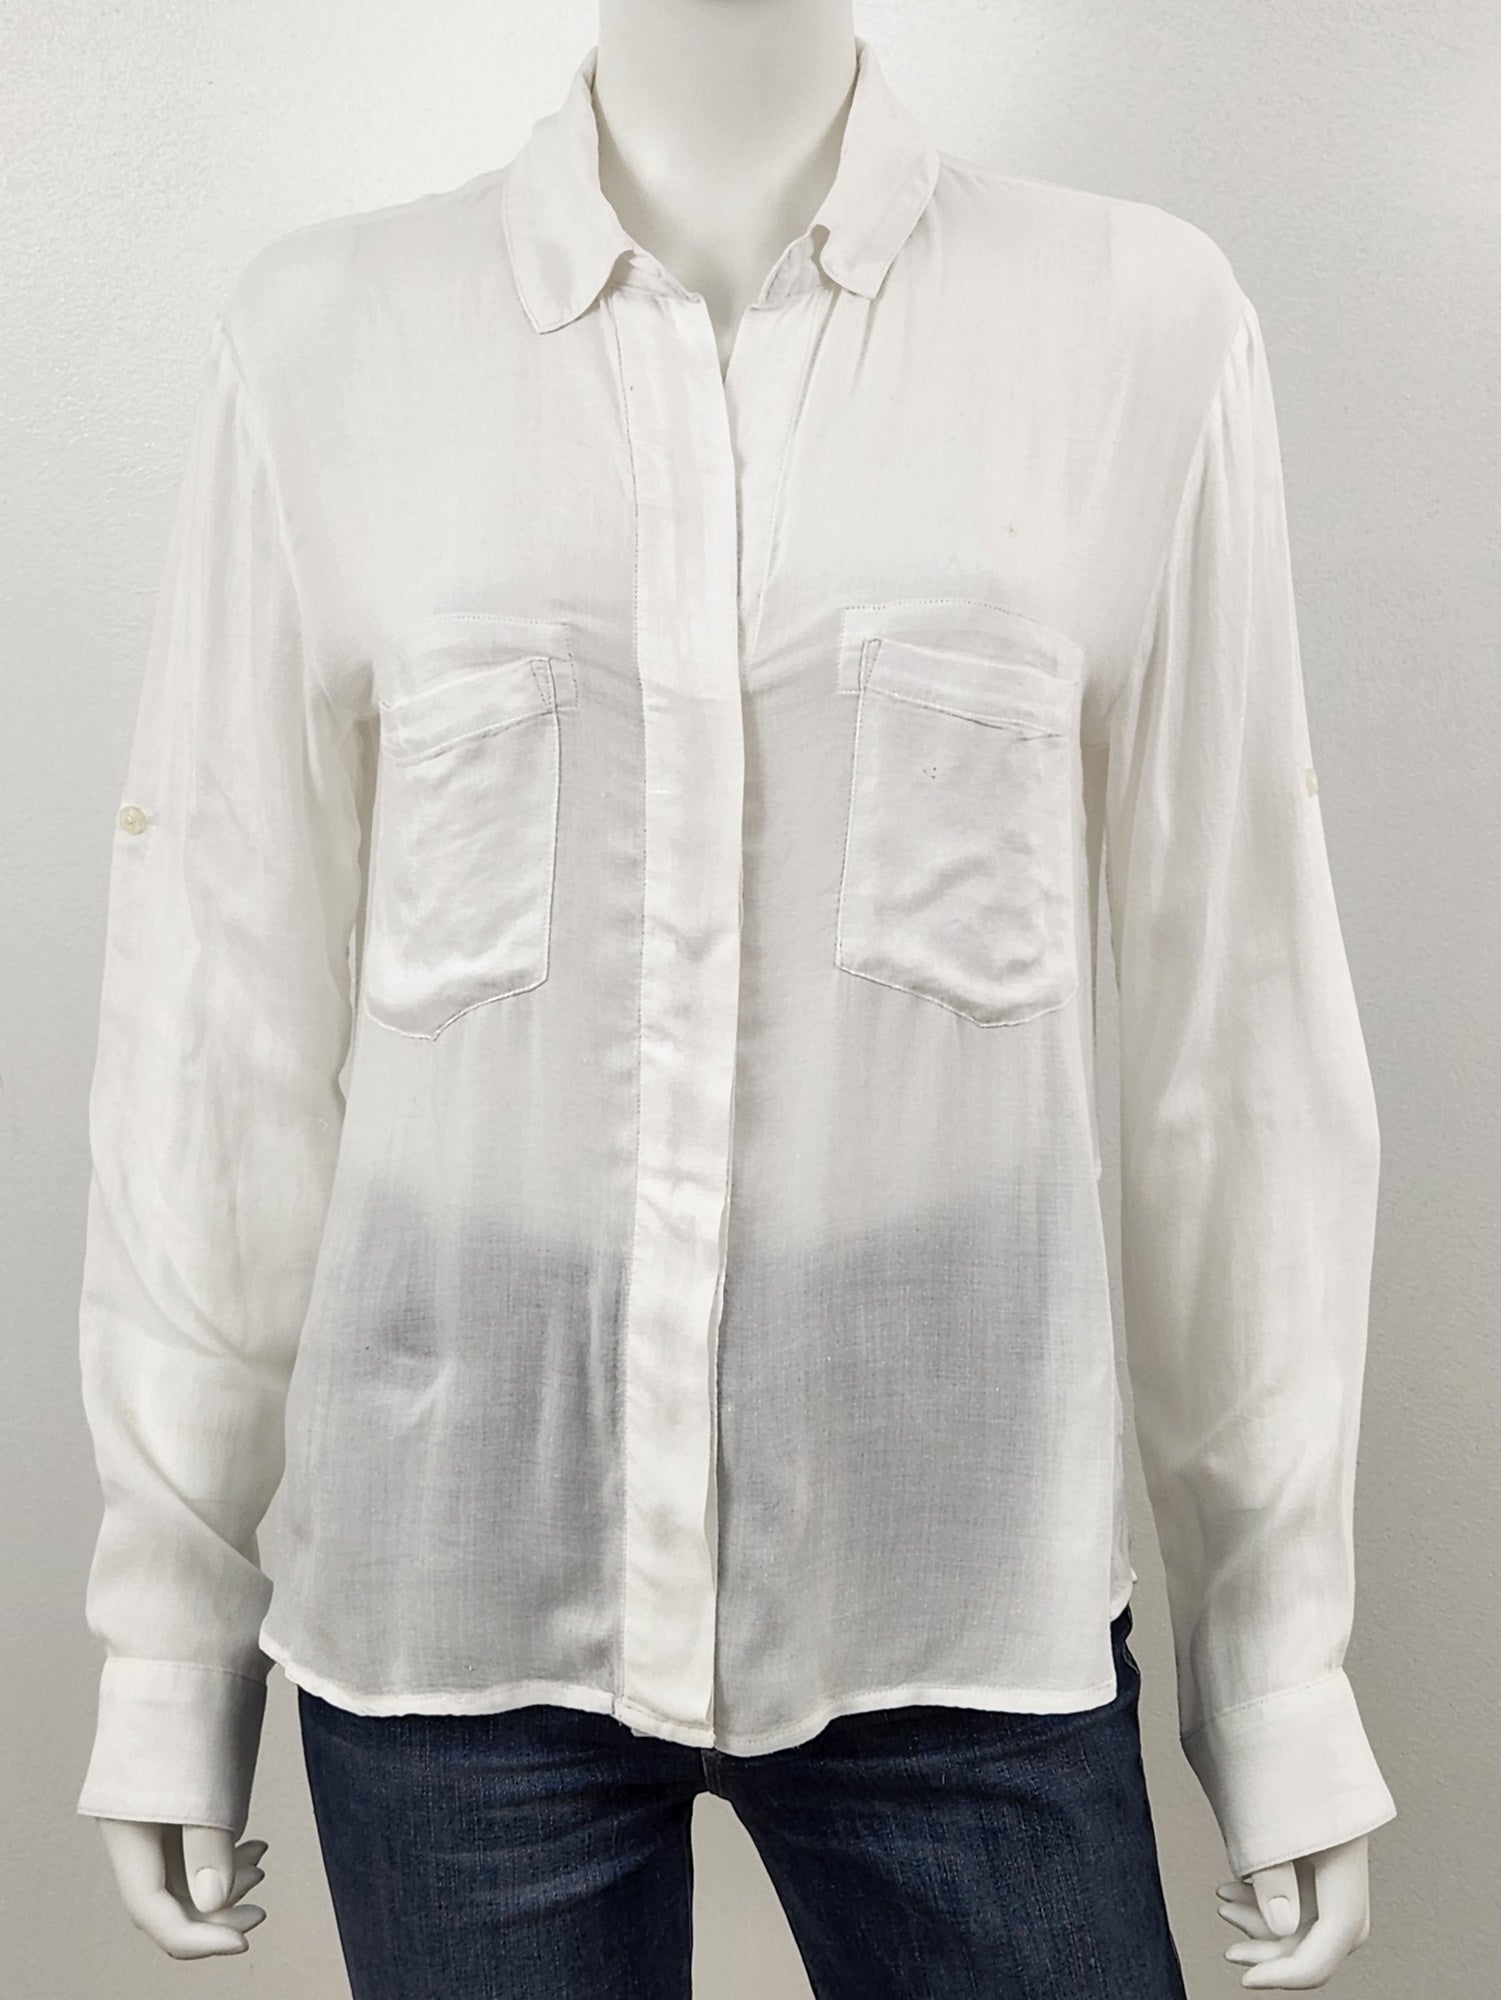 Relaxed Button Down Top Size Small